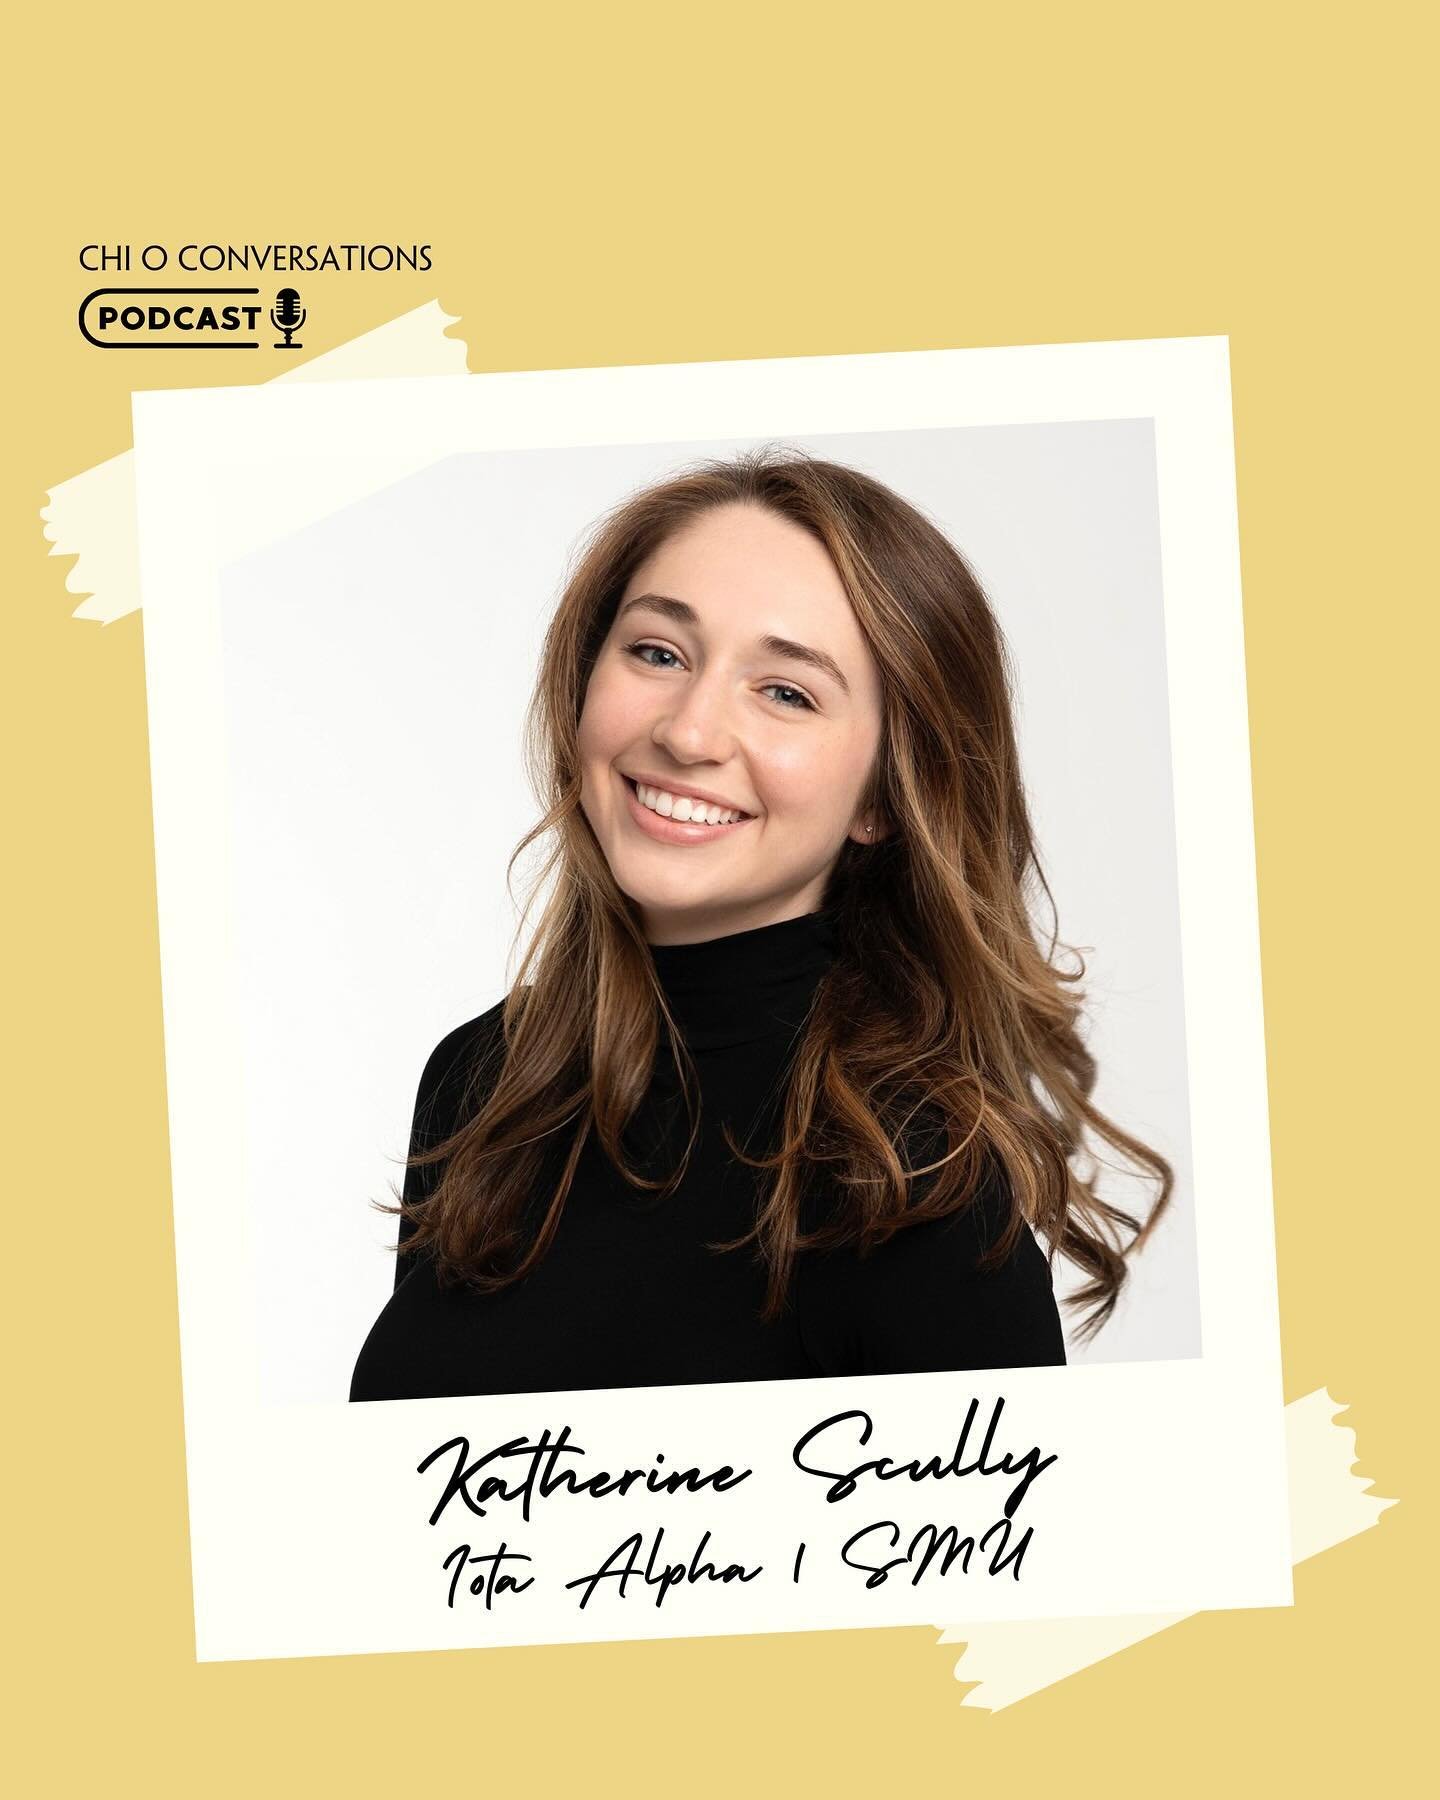 Life&rsquo;s challenges can seem overwhelming at times. But Katherine Scully, Iota Alpha | SMU, reminds us that sometimes these challenges can also prevent wonderful opportunities. Check out episode 7 of Chi O Conversations, where Katherine talks abo